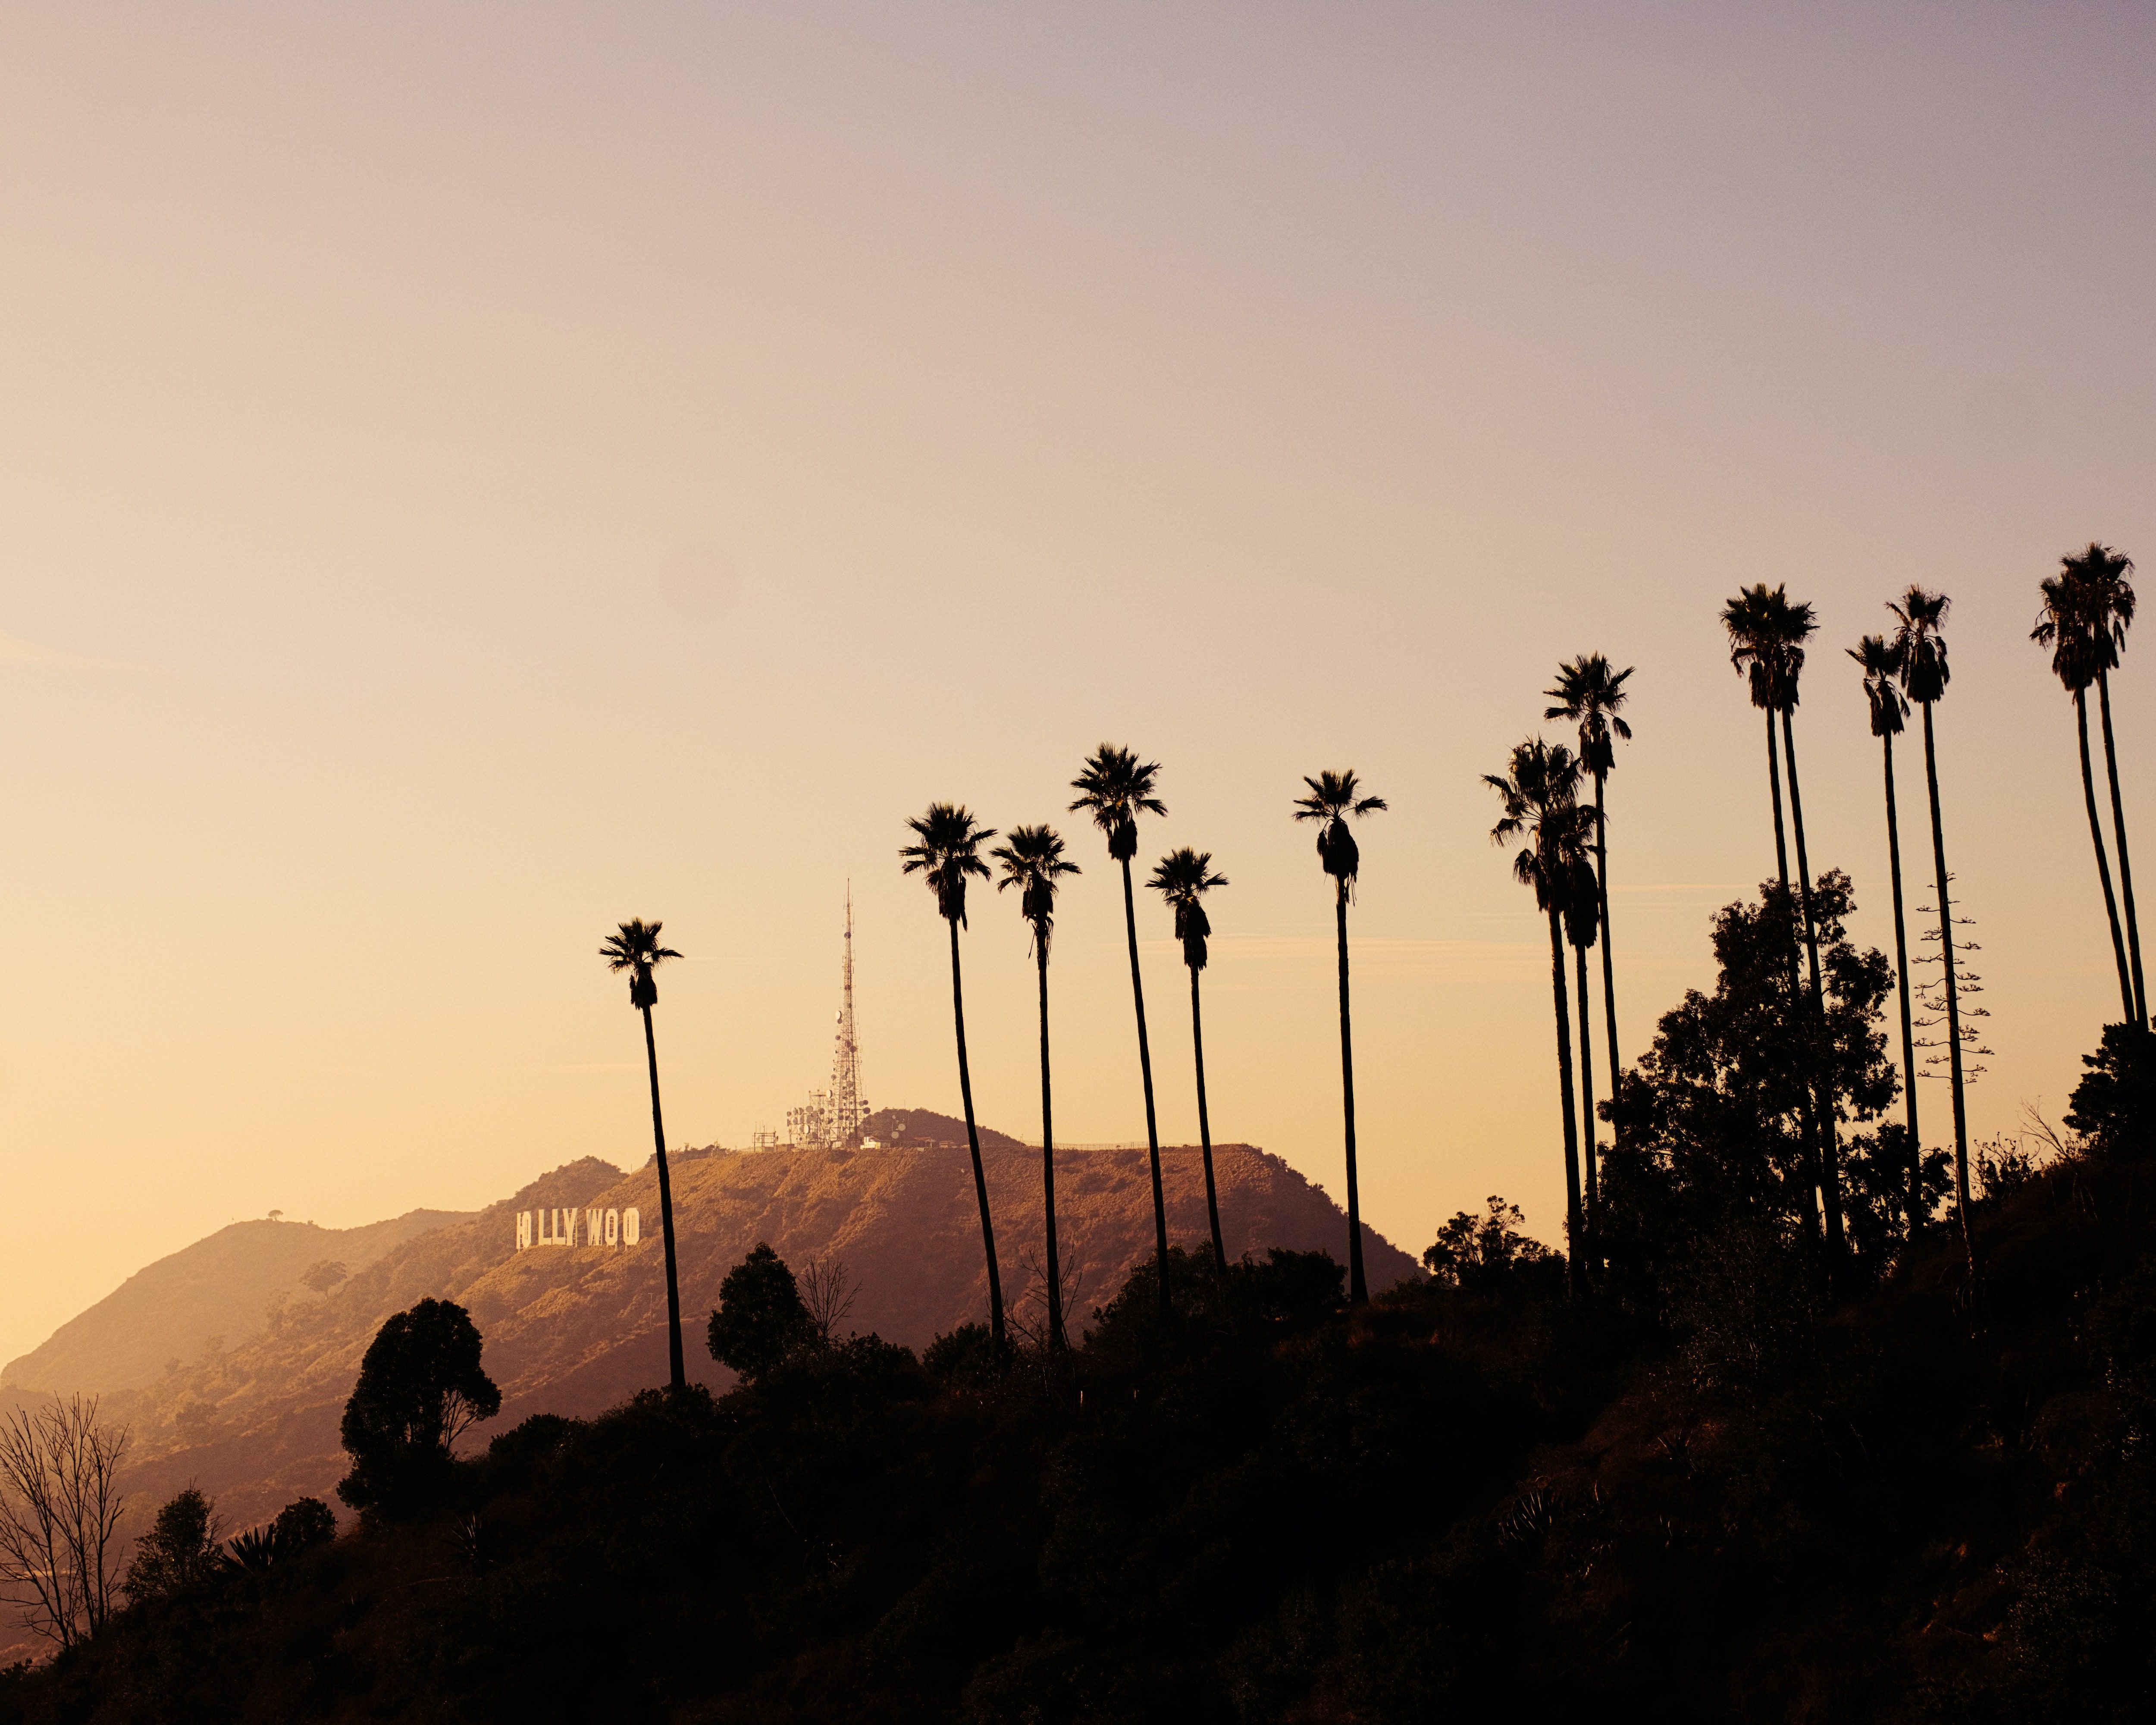 A group of palm trees on the side hill - Los Angeles